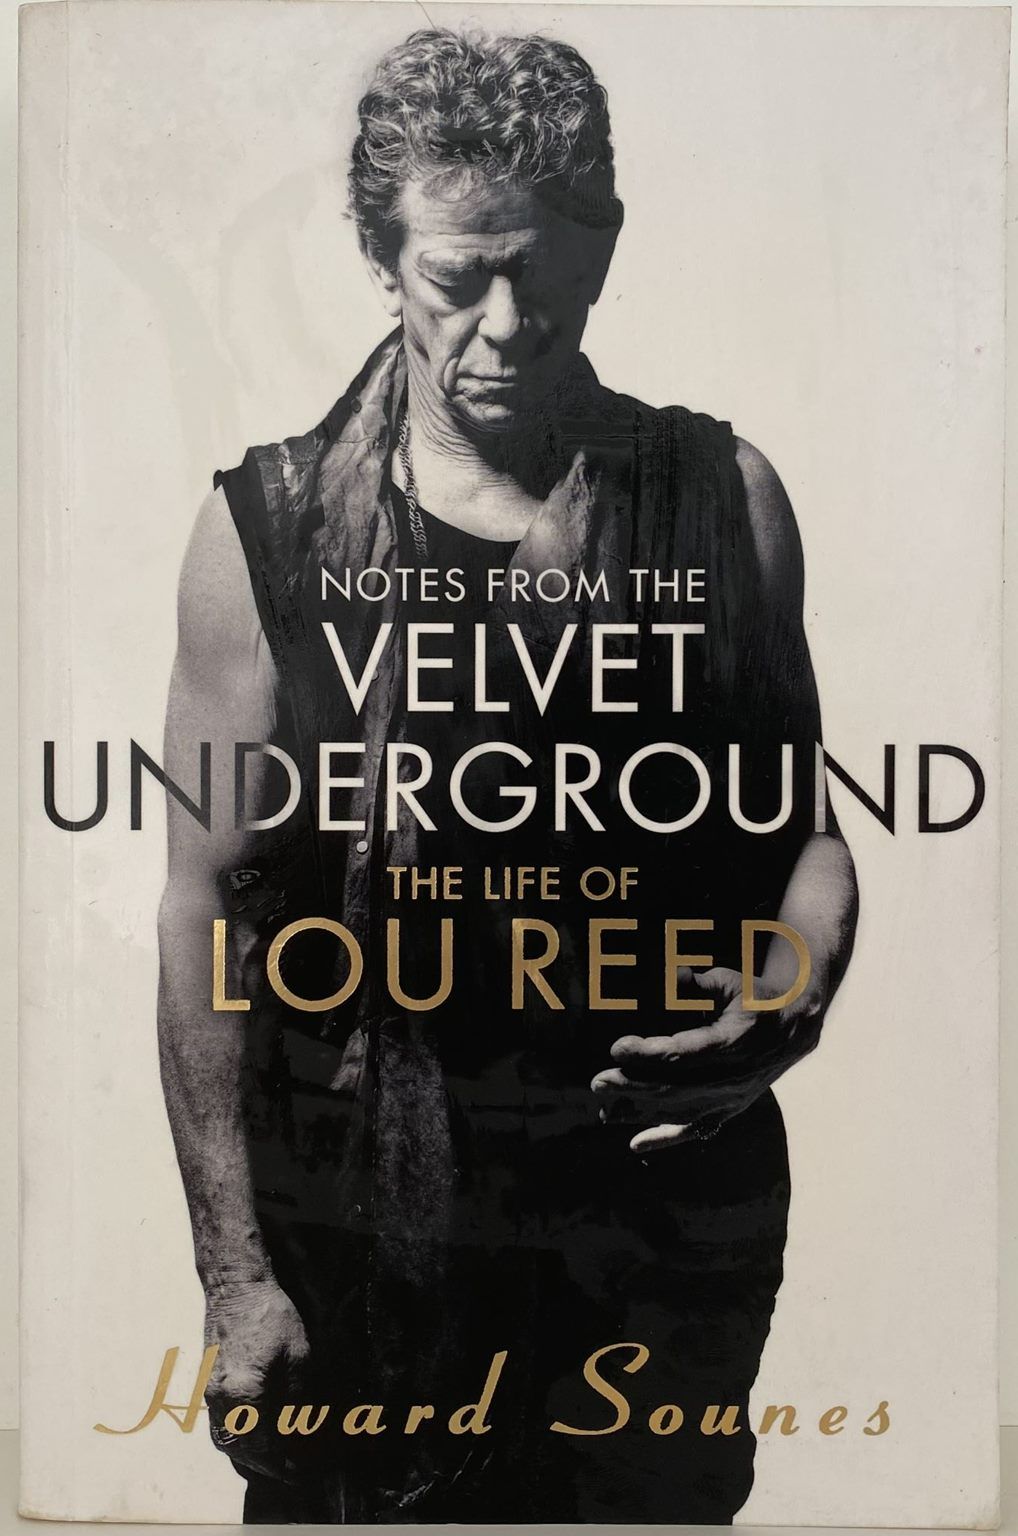 NOTES FROM THE VELVET UNDERGROUND: The Life of Lou Reed